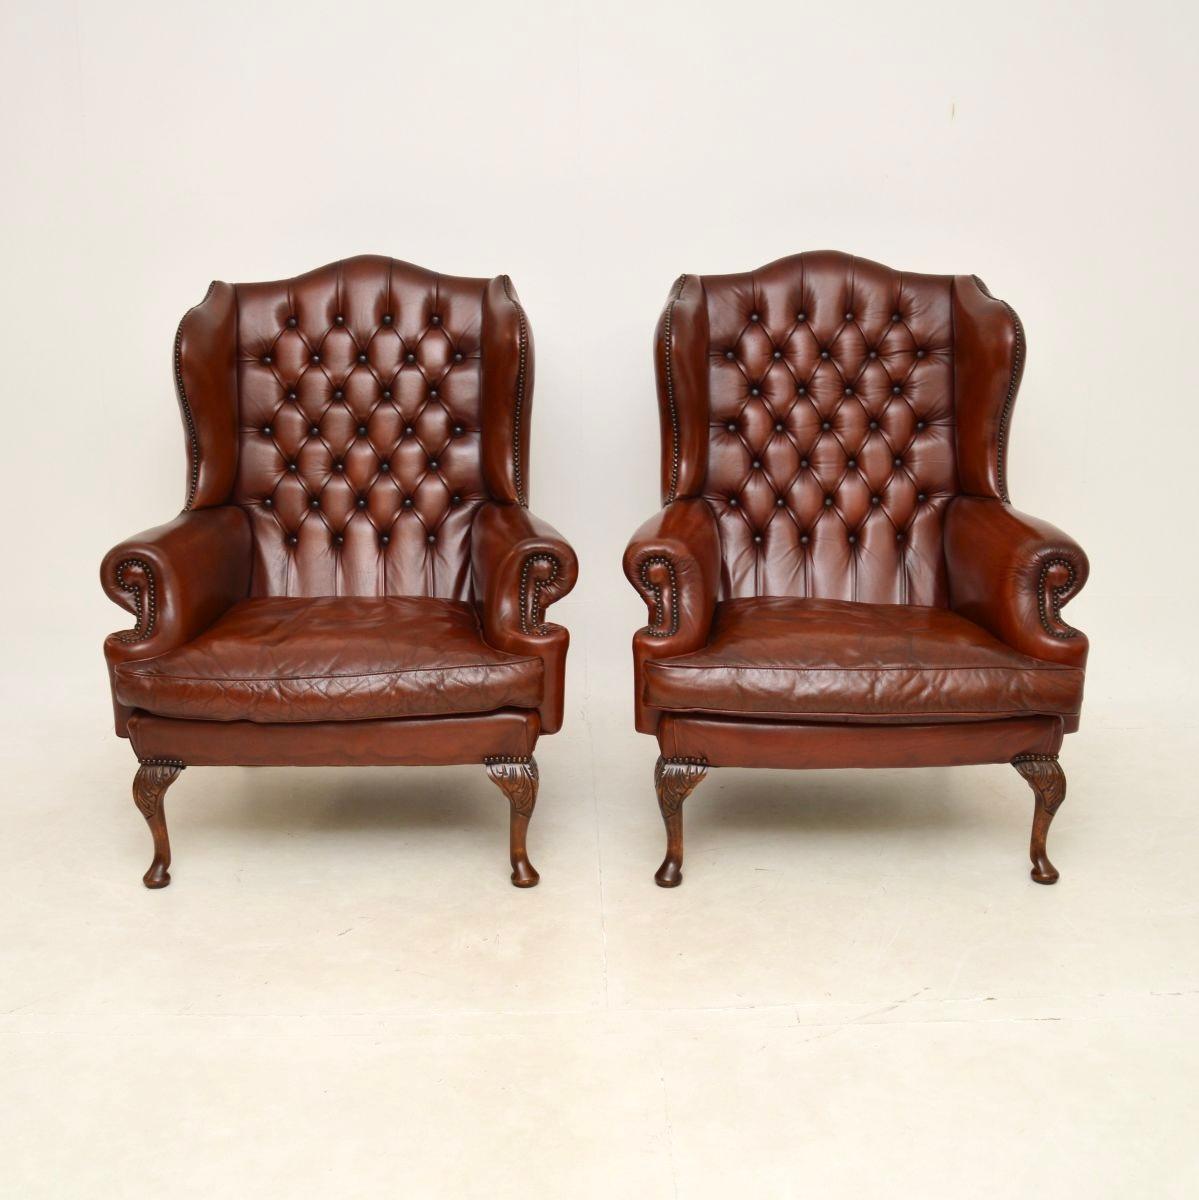 A fantastic pair of antique leather wing back armchairs. They were made in England, they date from around the 1930’s.

The quality is superb and they are extremely comfortable to relax in, they are supportive and have down filled cushions. The